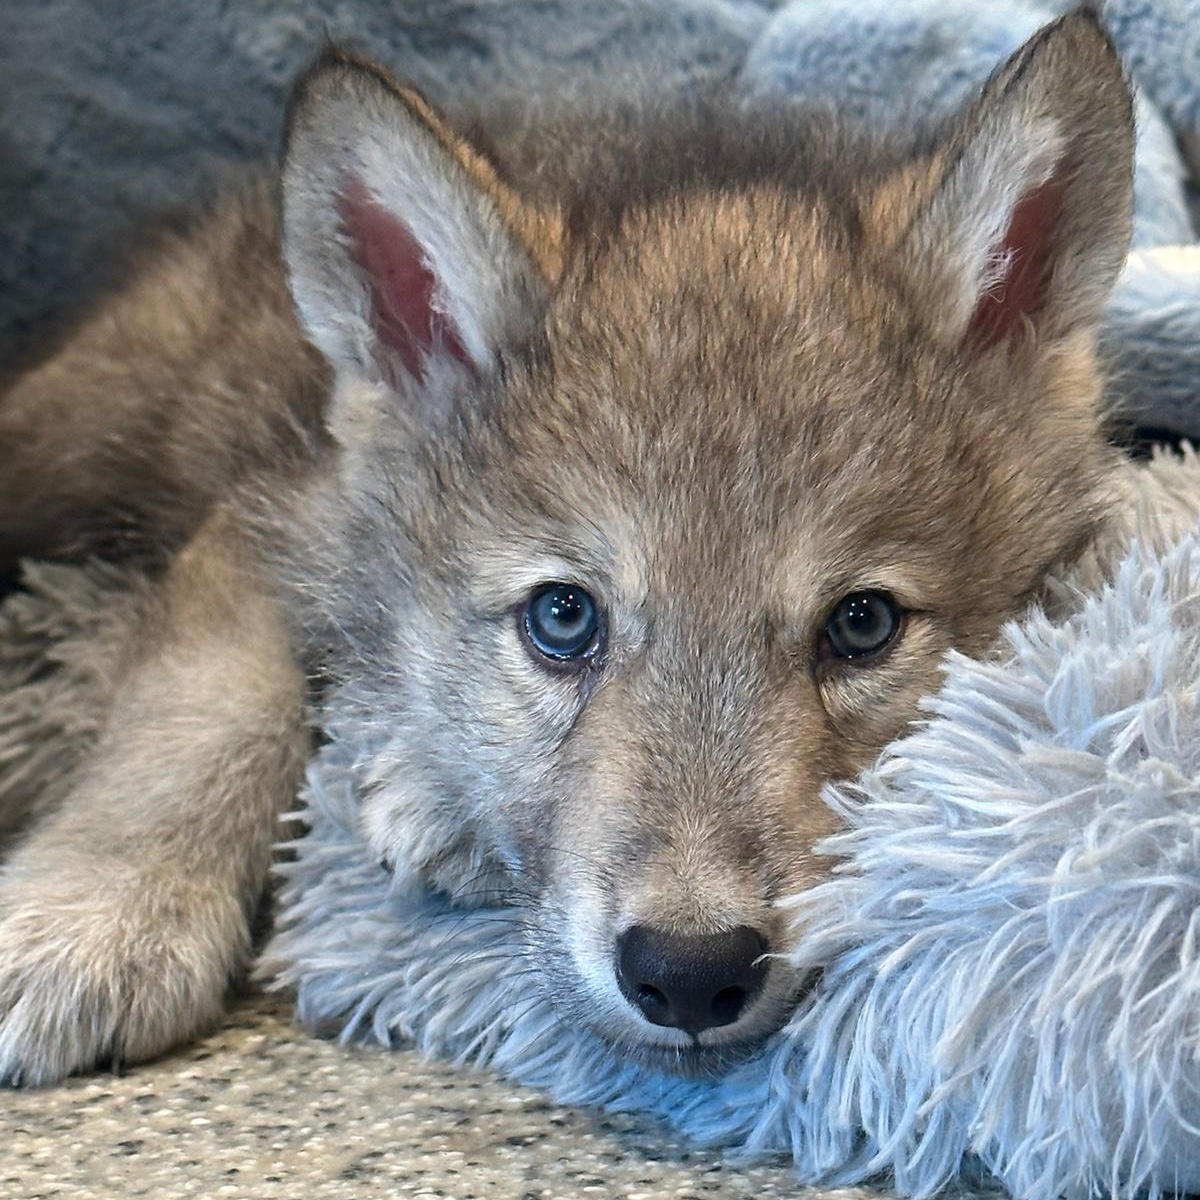 Please sign this letter to your senators to ask them to reject @laurenboebert's ignorant bill that would drive wolves to extinction. 
 engage.nywolf.org/site/Advocacy?…
#Relistwolves
@relistwolves